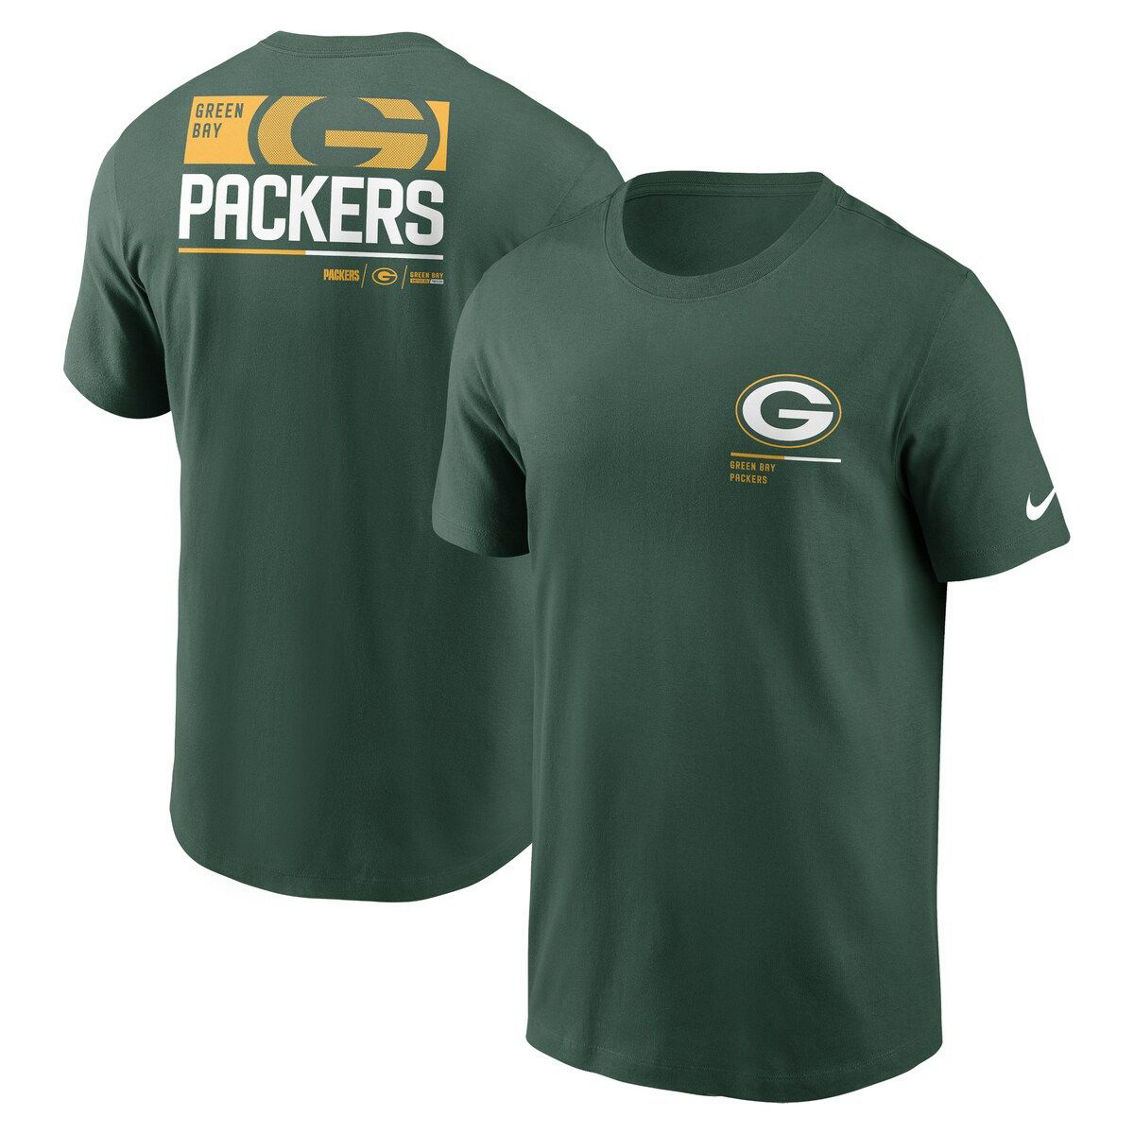 Nike Men's Green Green Bay Packers Team Incline T-Shirt - Image 2 of 4